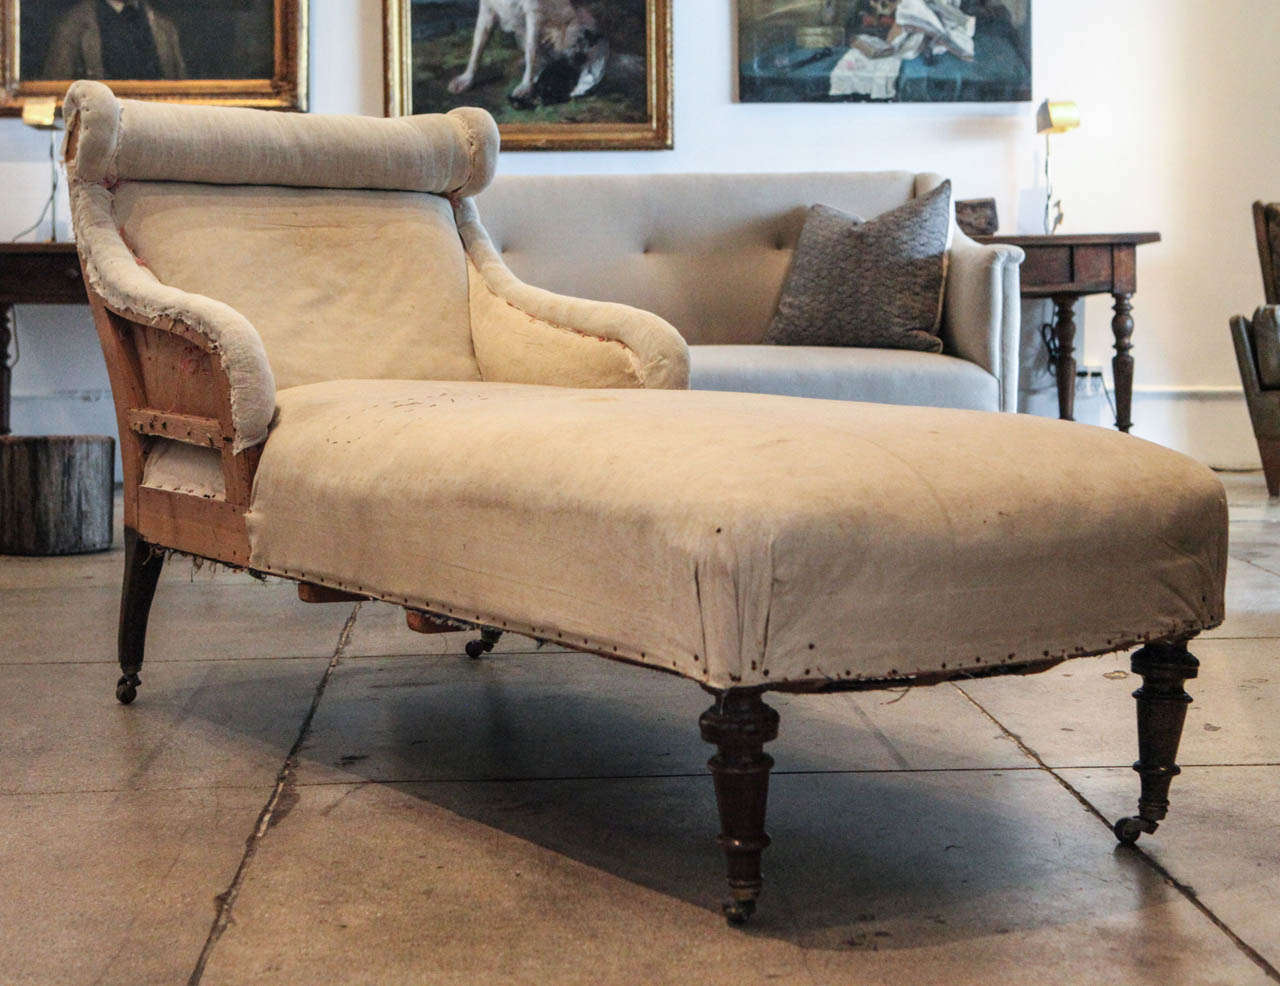 A beautifully curved Swedish chaise in its original upholstered muslin.